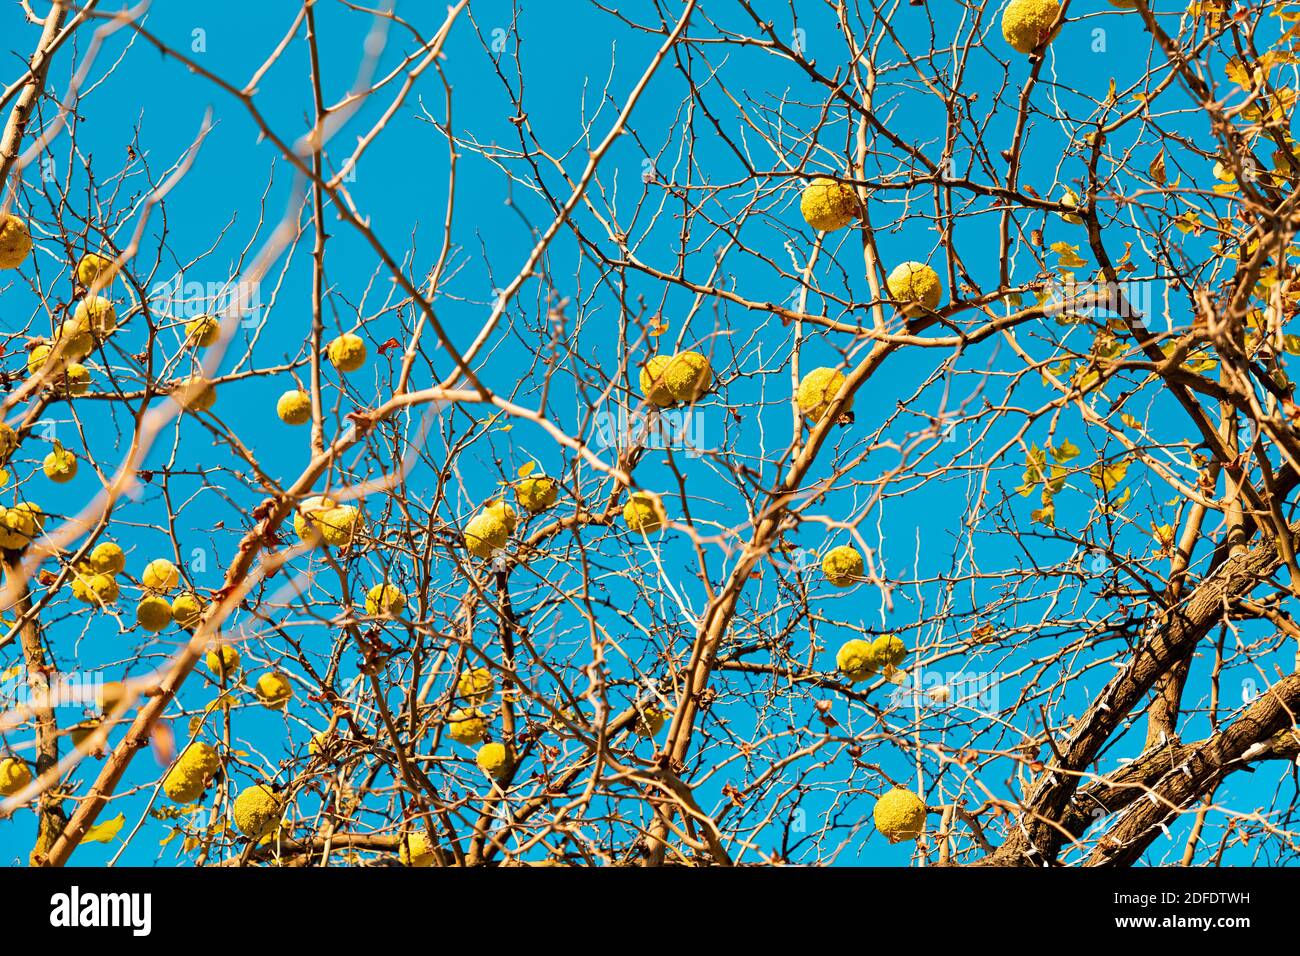 Bottom view of the branches of the maclura pomifera tree hung with fruits. Blue sky in the background. Stock Photo